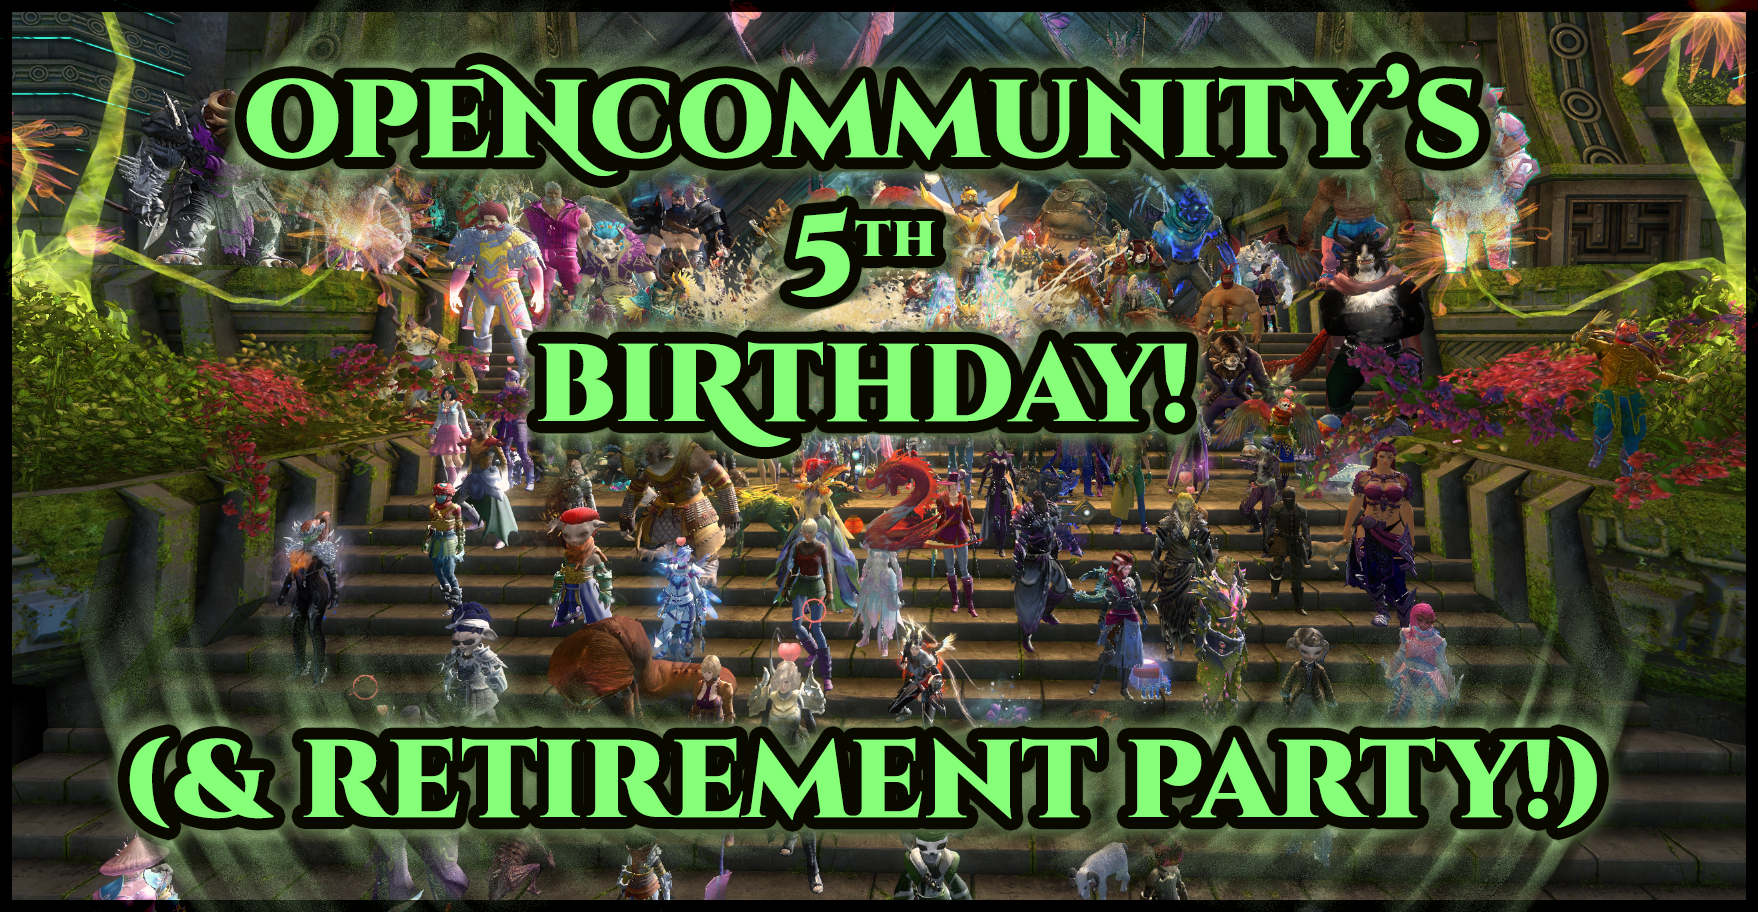 Happy 5th Birthday, OC - Retirement Party on May 23rd!